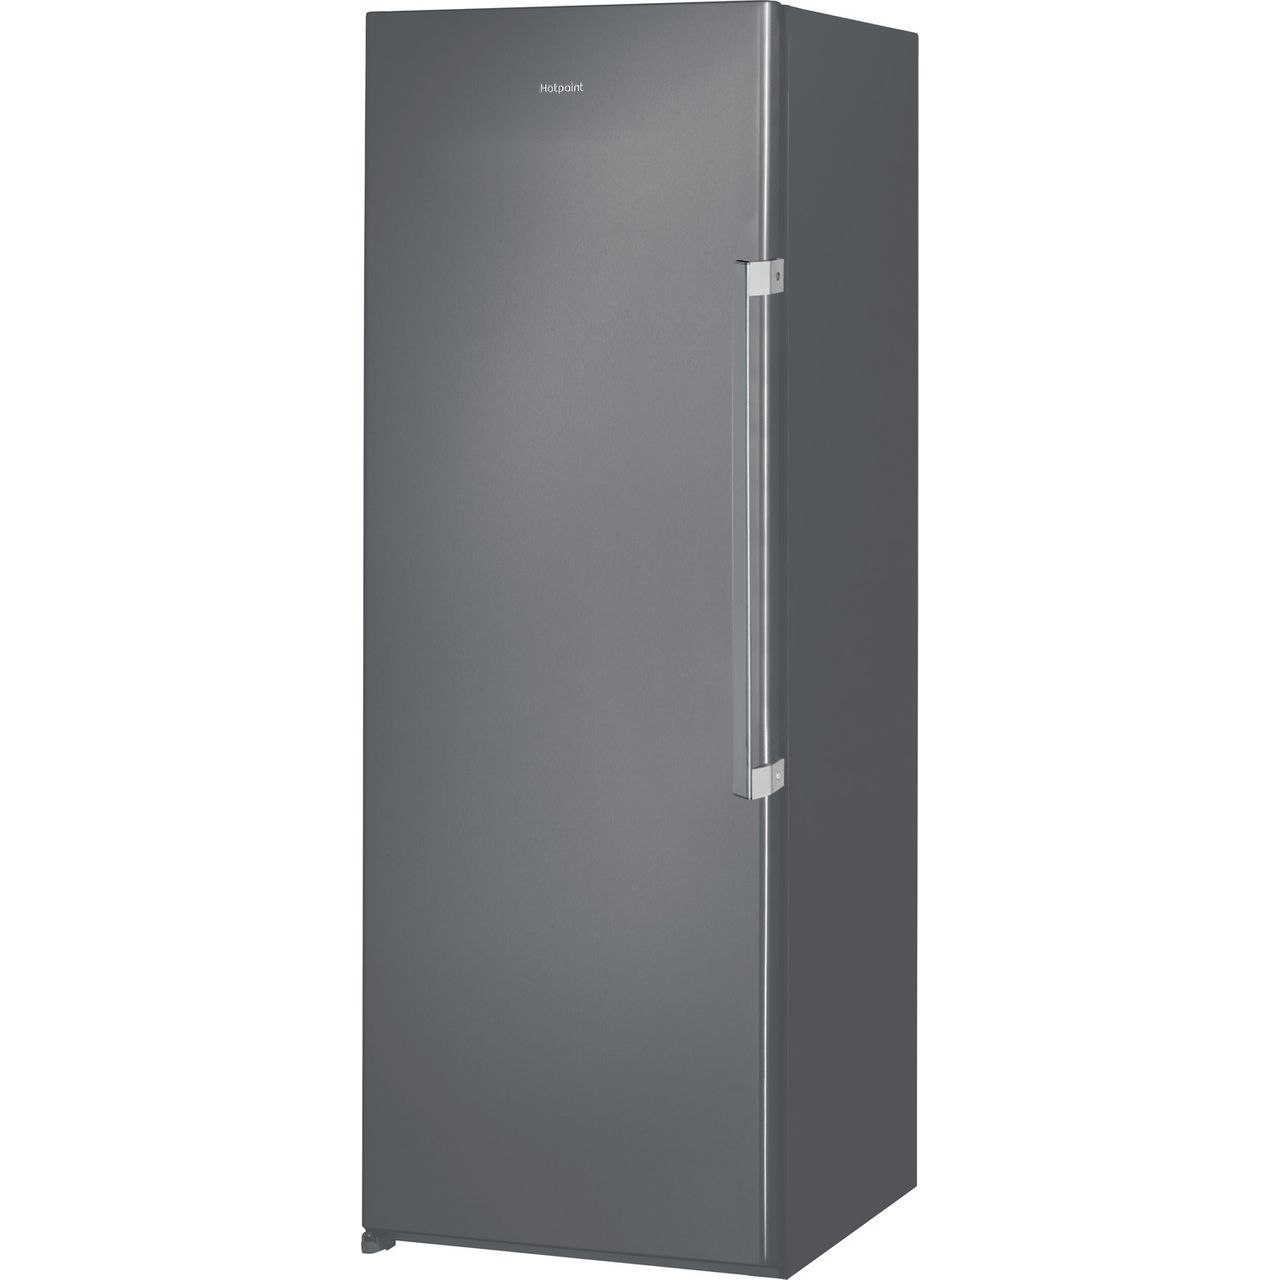 Hotpoint UH6F1CG1 Frost Free Upright Freezer Review